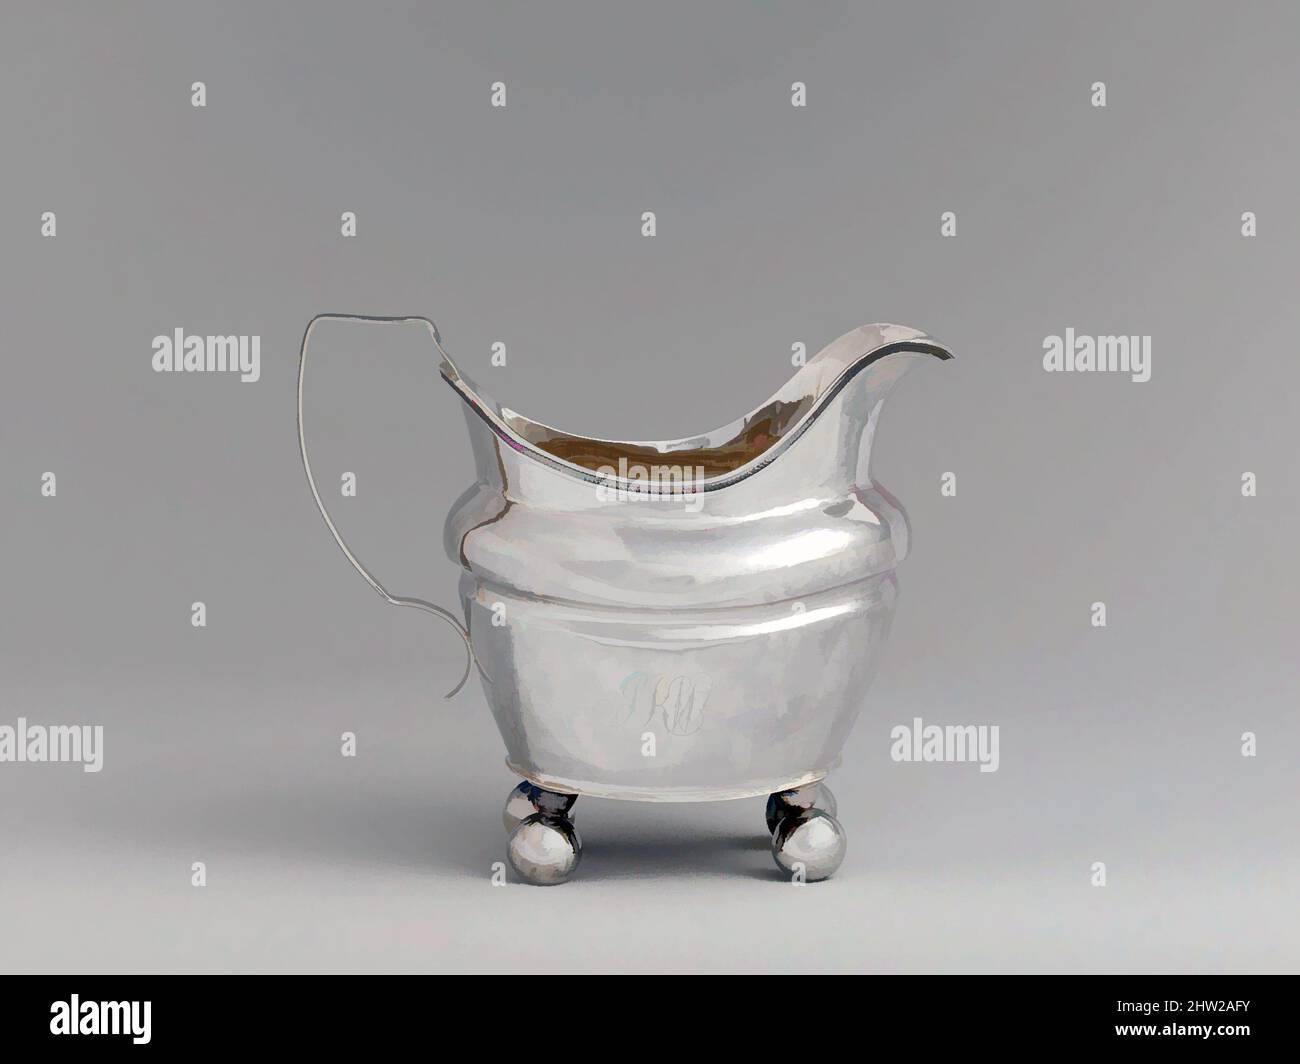 Art inspired by Creamer, 1810–30, Made in Albany, New York, United States, American, Silver, 5 1/2 x 6 5/8 in. (14 x 16.8 cm); 7 oz. 17 dwt. (243.4 g), Silver, Isaac Hutton (American, New York 1766–1855 Albany, New York, Classic works modernized by Artotop with a splash of modernity. Shapes, color and value, eye-catching visual impact on art. Emotions through freedom of artworks in a contemporary way. A timeless message pursuing a wildly creative new direction. Artists turning to the digital medium and creating the Artotop NFT Stock Photo